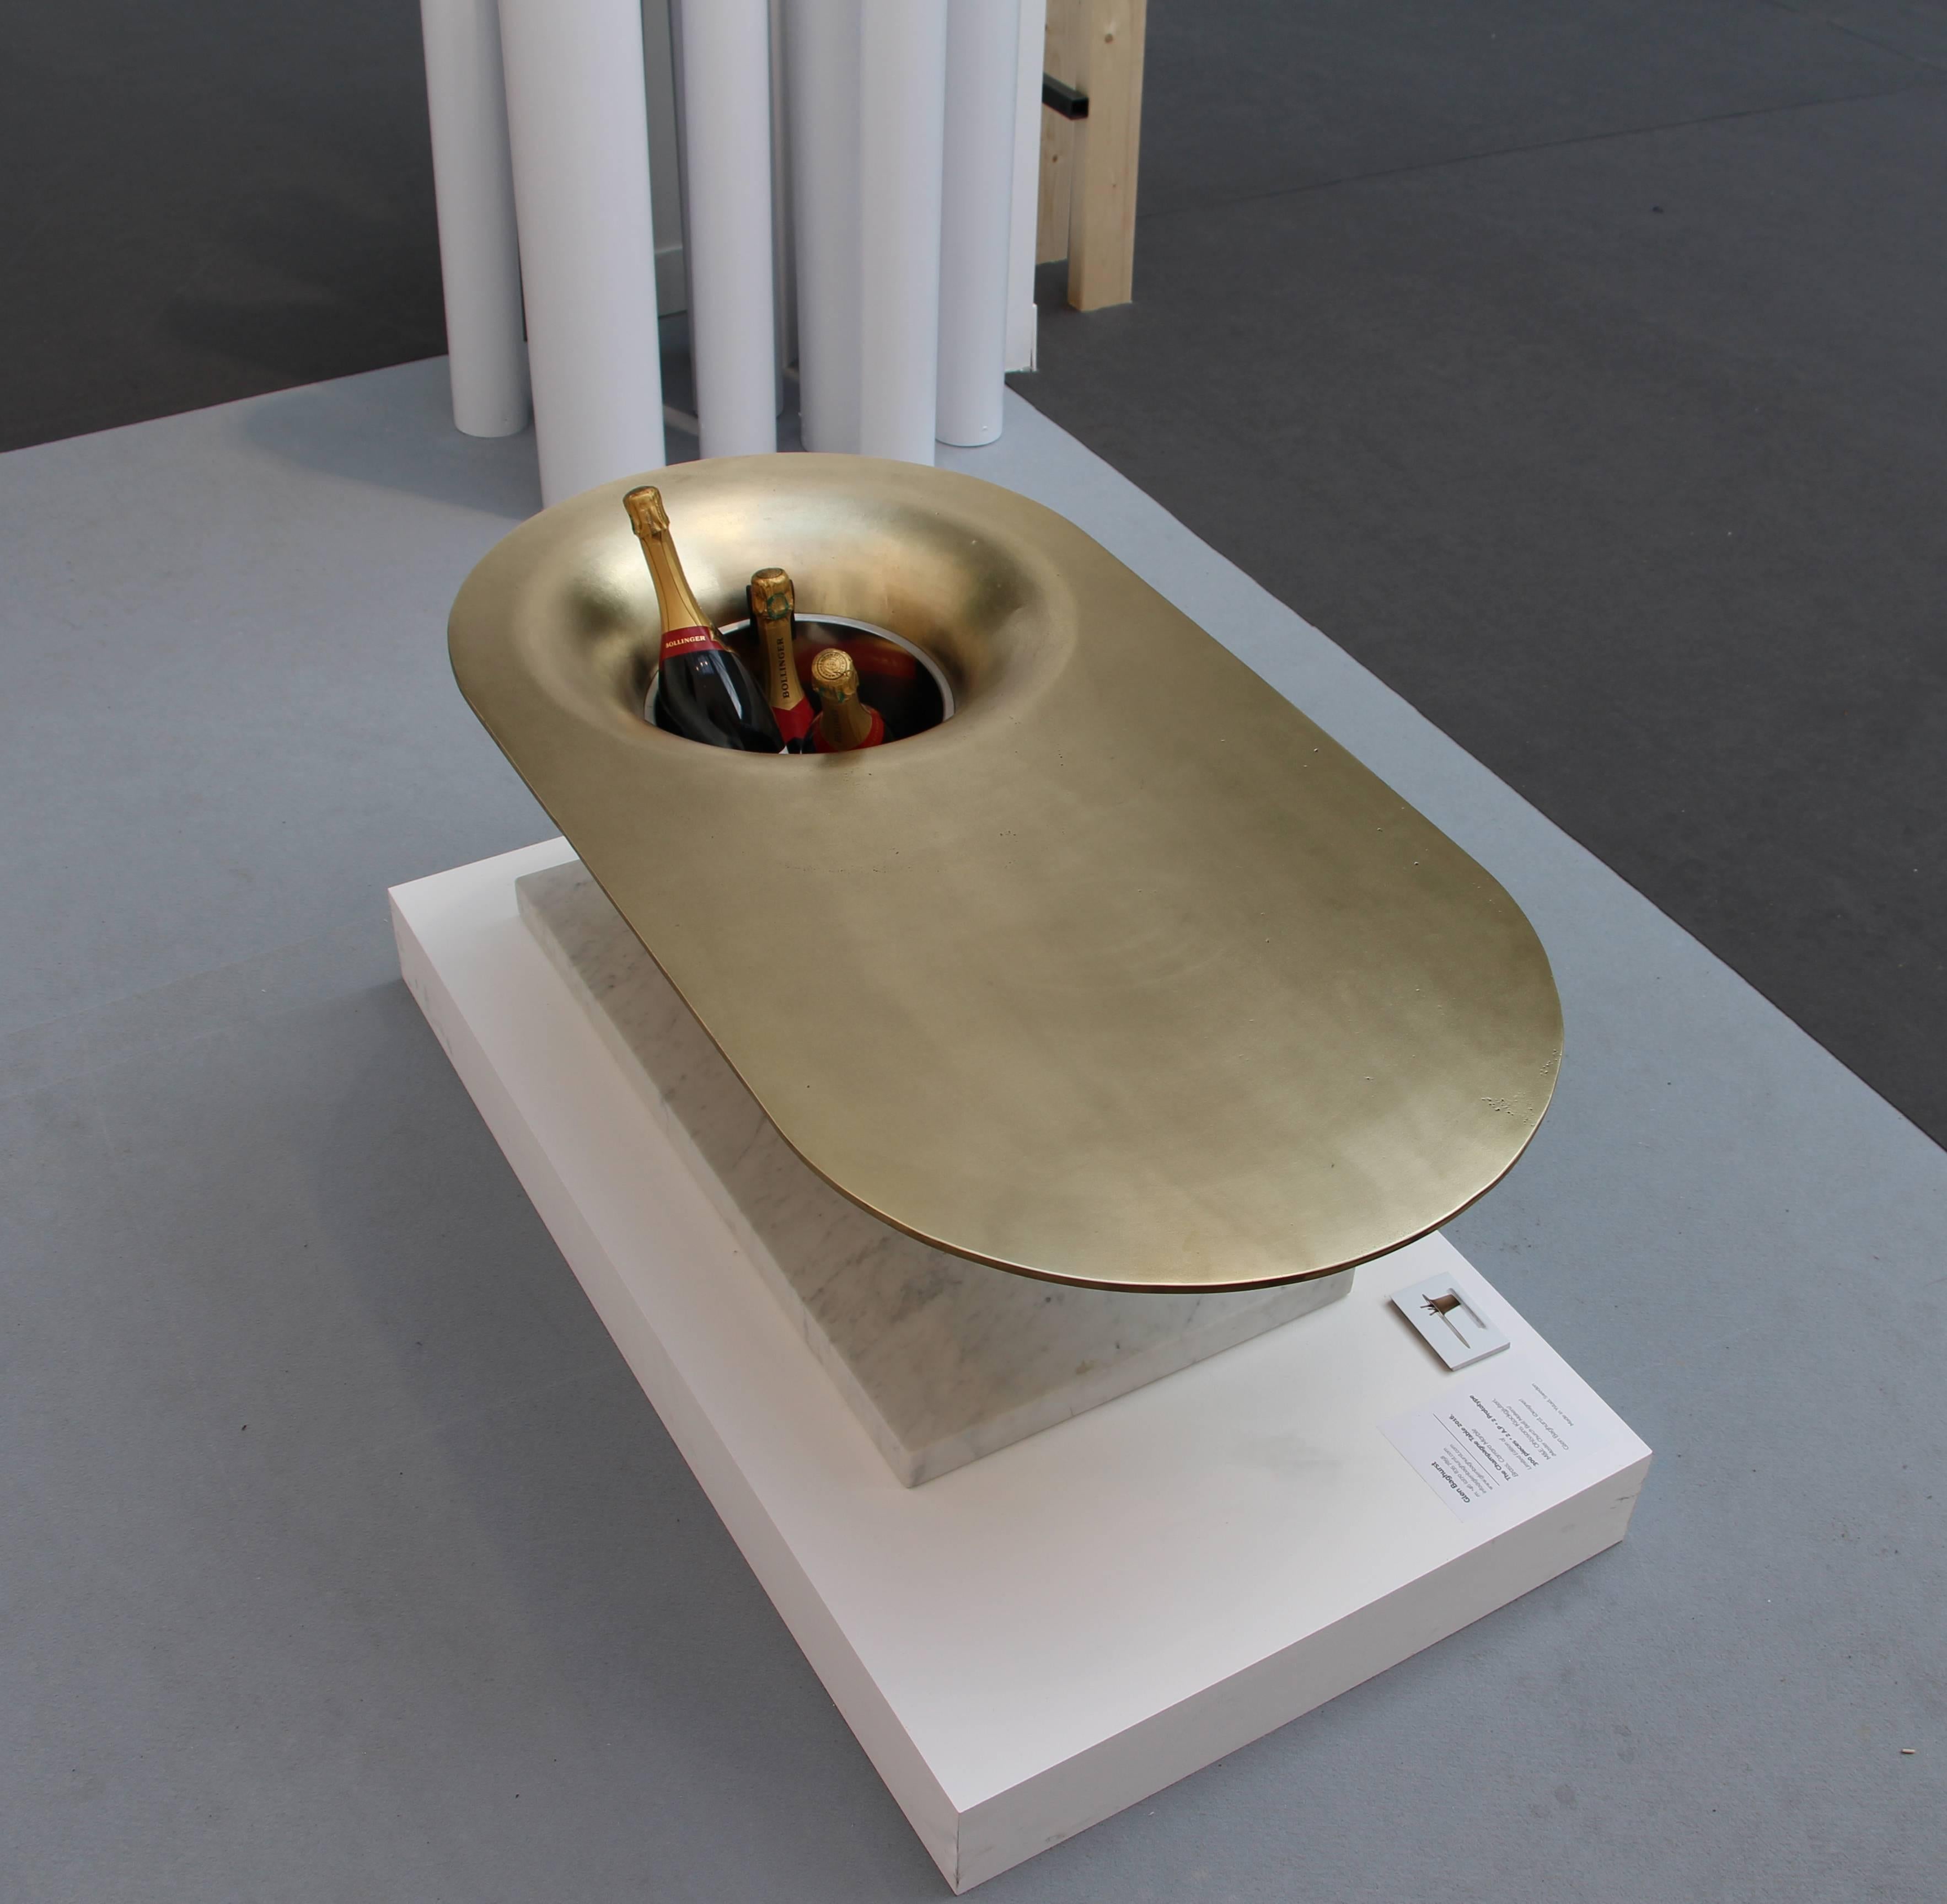 This heavy opulent table is used to chill and serve champagne. Three bottles of champagne should be kept in the bell at all times as potential for a great evening. The tabletop is made from solid cast brass. This is cantilevered by a heavy stone